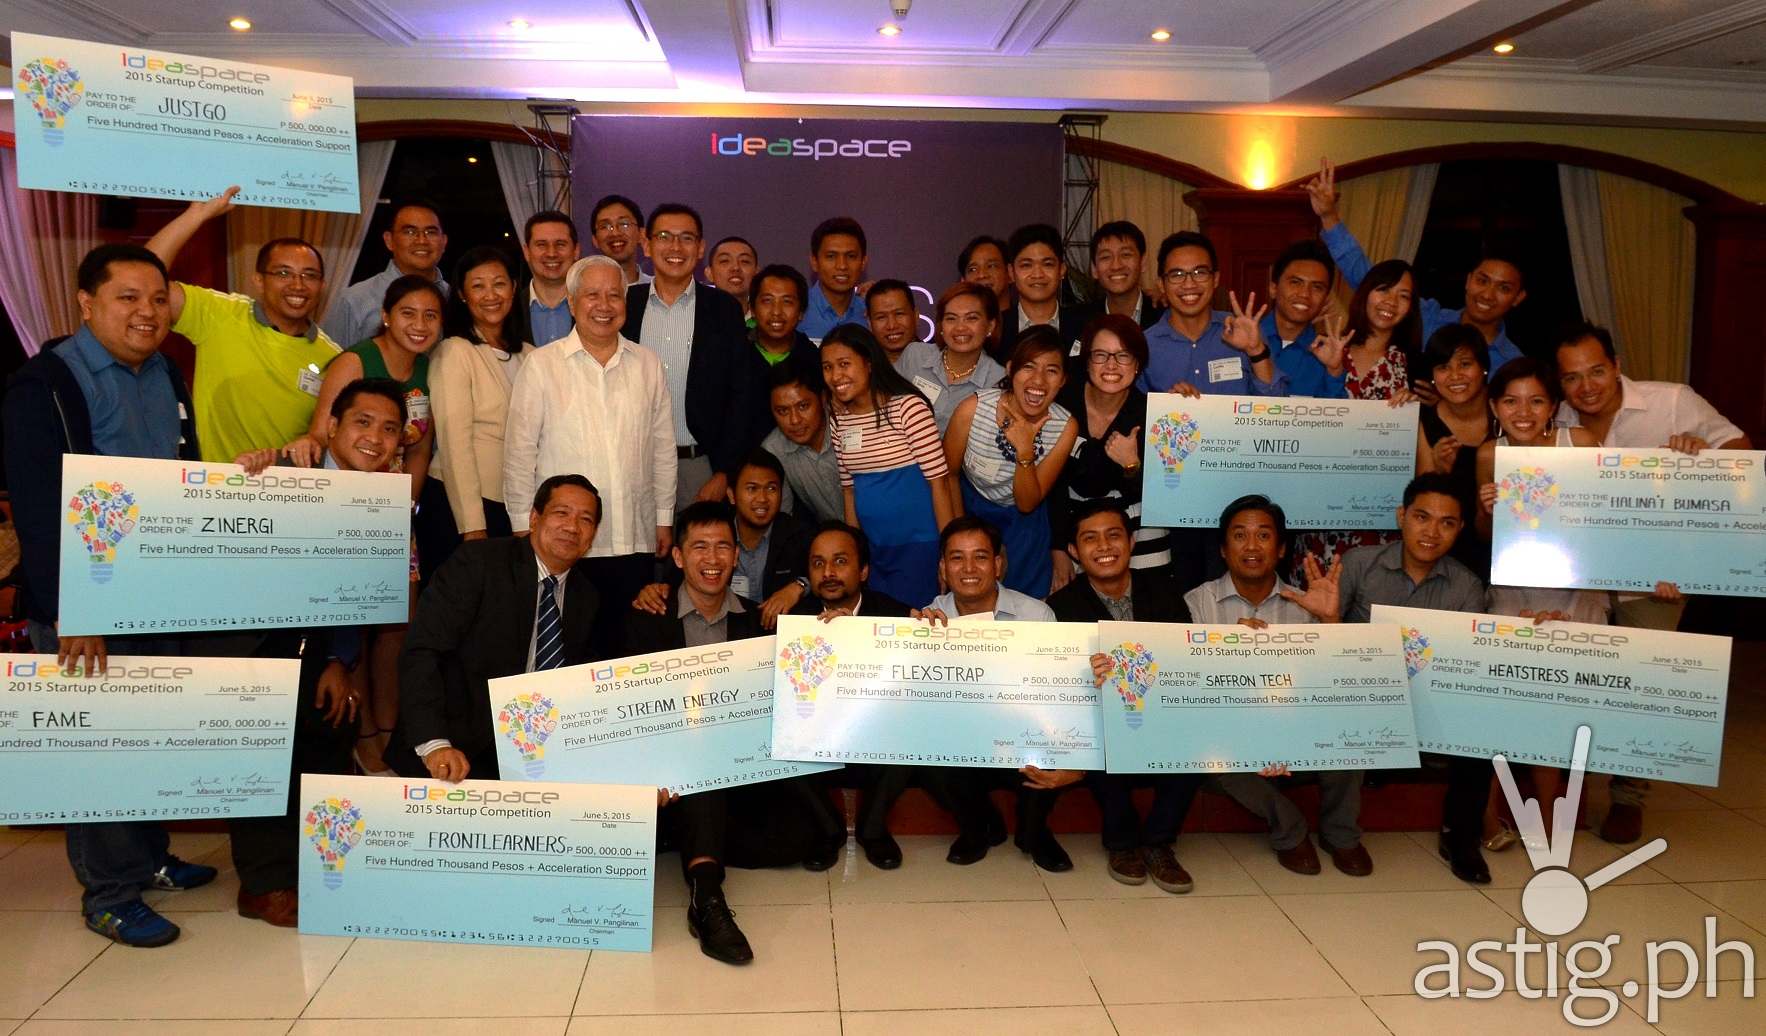 The IdeaSpace 2015 Top Ten Startups along with (standing from leftmost, back row) IdeaSpace President and Co-Founder Earl Martin Valencia, Meralco Chief Technology Advisor Gavin Barfield, IdeaSpace Co-Founder Marthyn Cuan, and Meralco President and CEO Oscar S. Reyes (2nd row, standing, in white).